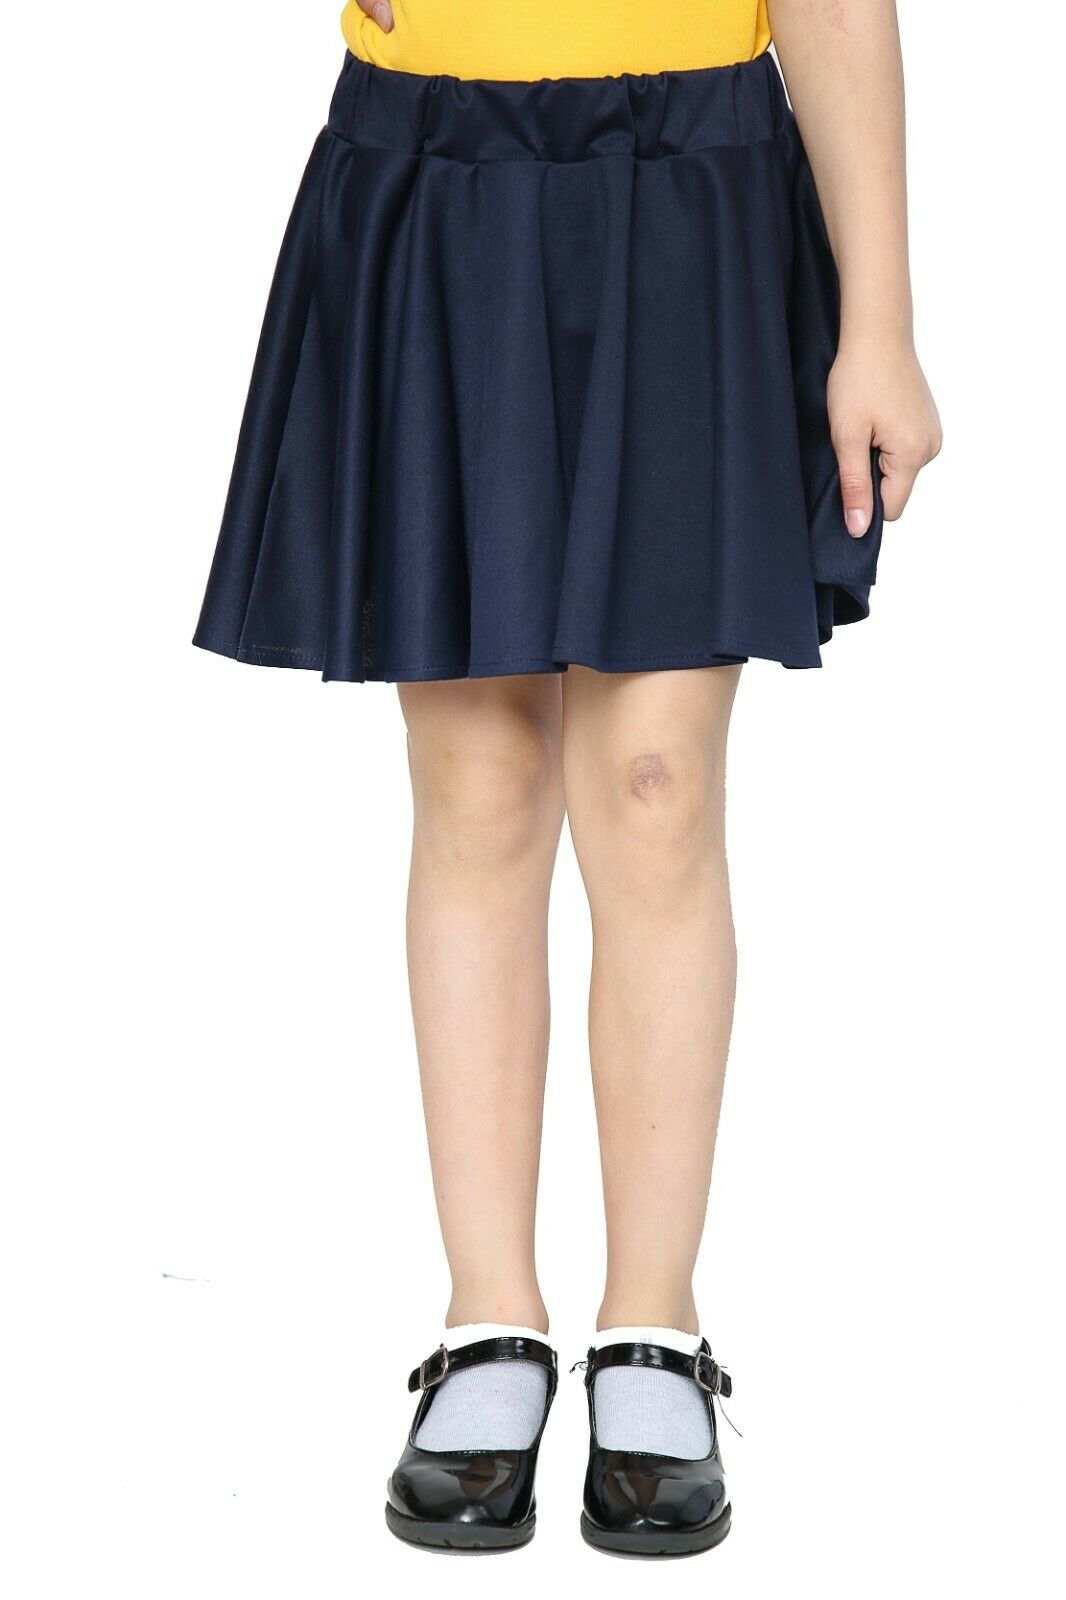 Skater Skirt Kids Casual Party and School Wear Navy Blue Skirts Girls 7 to 13 Years